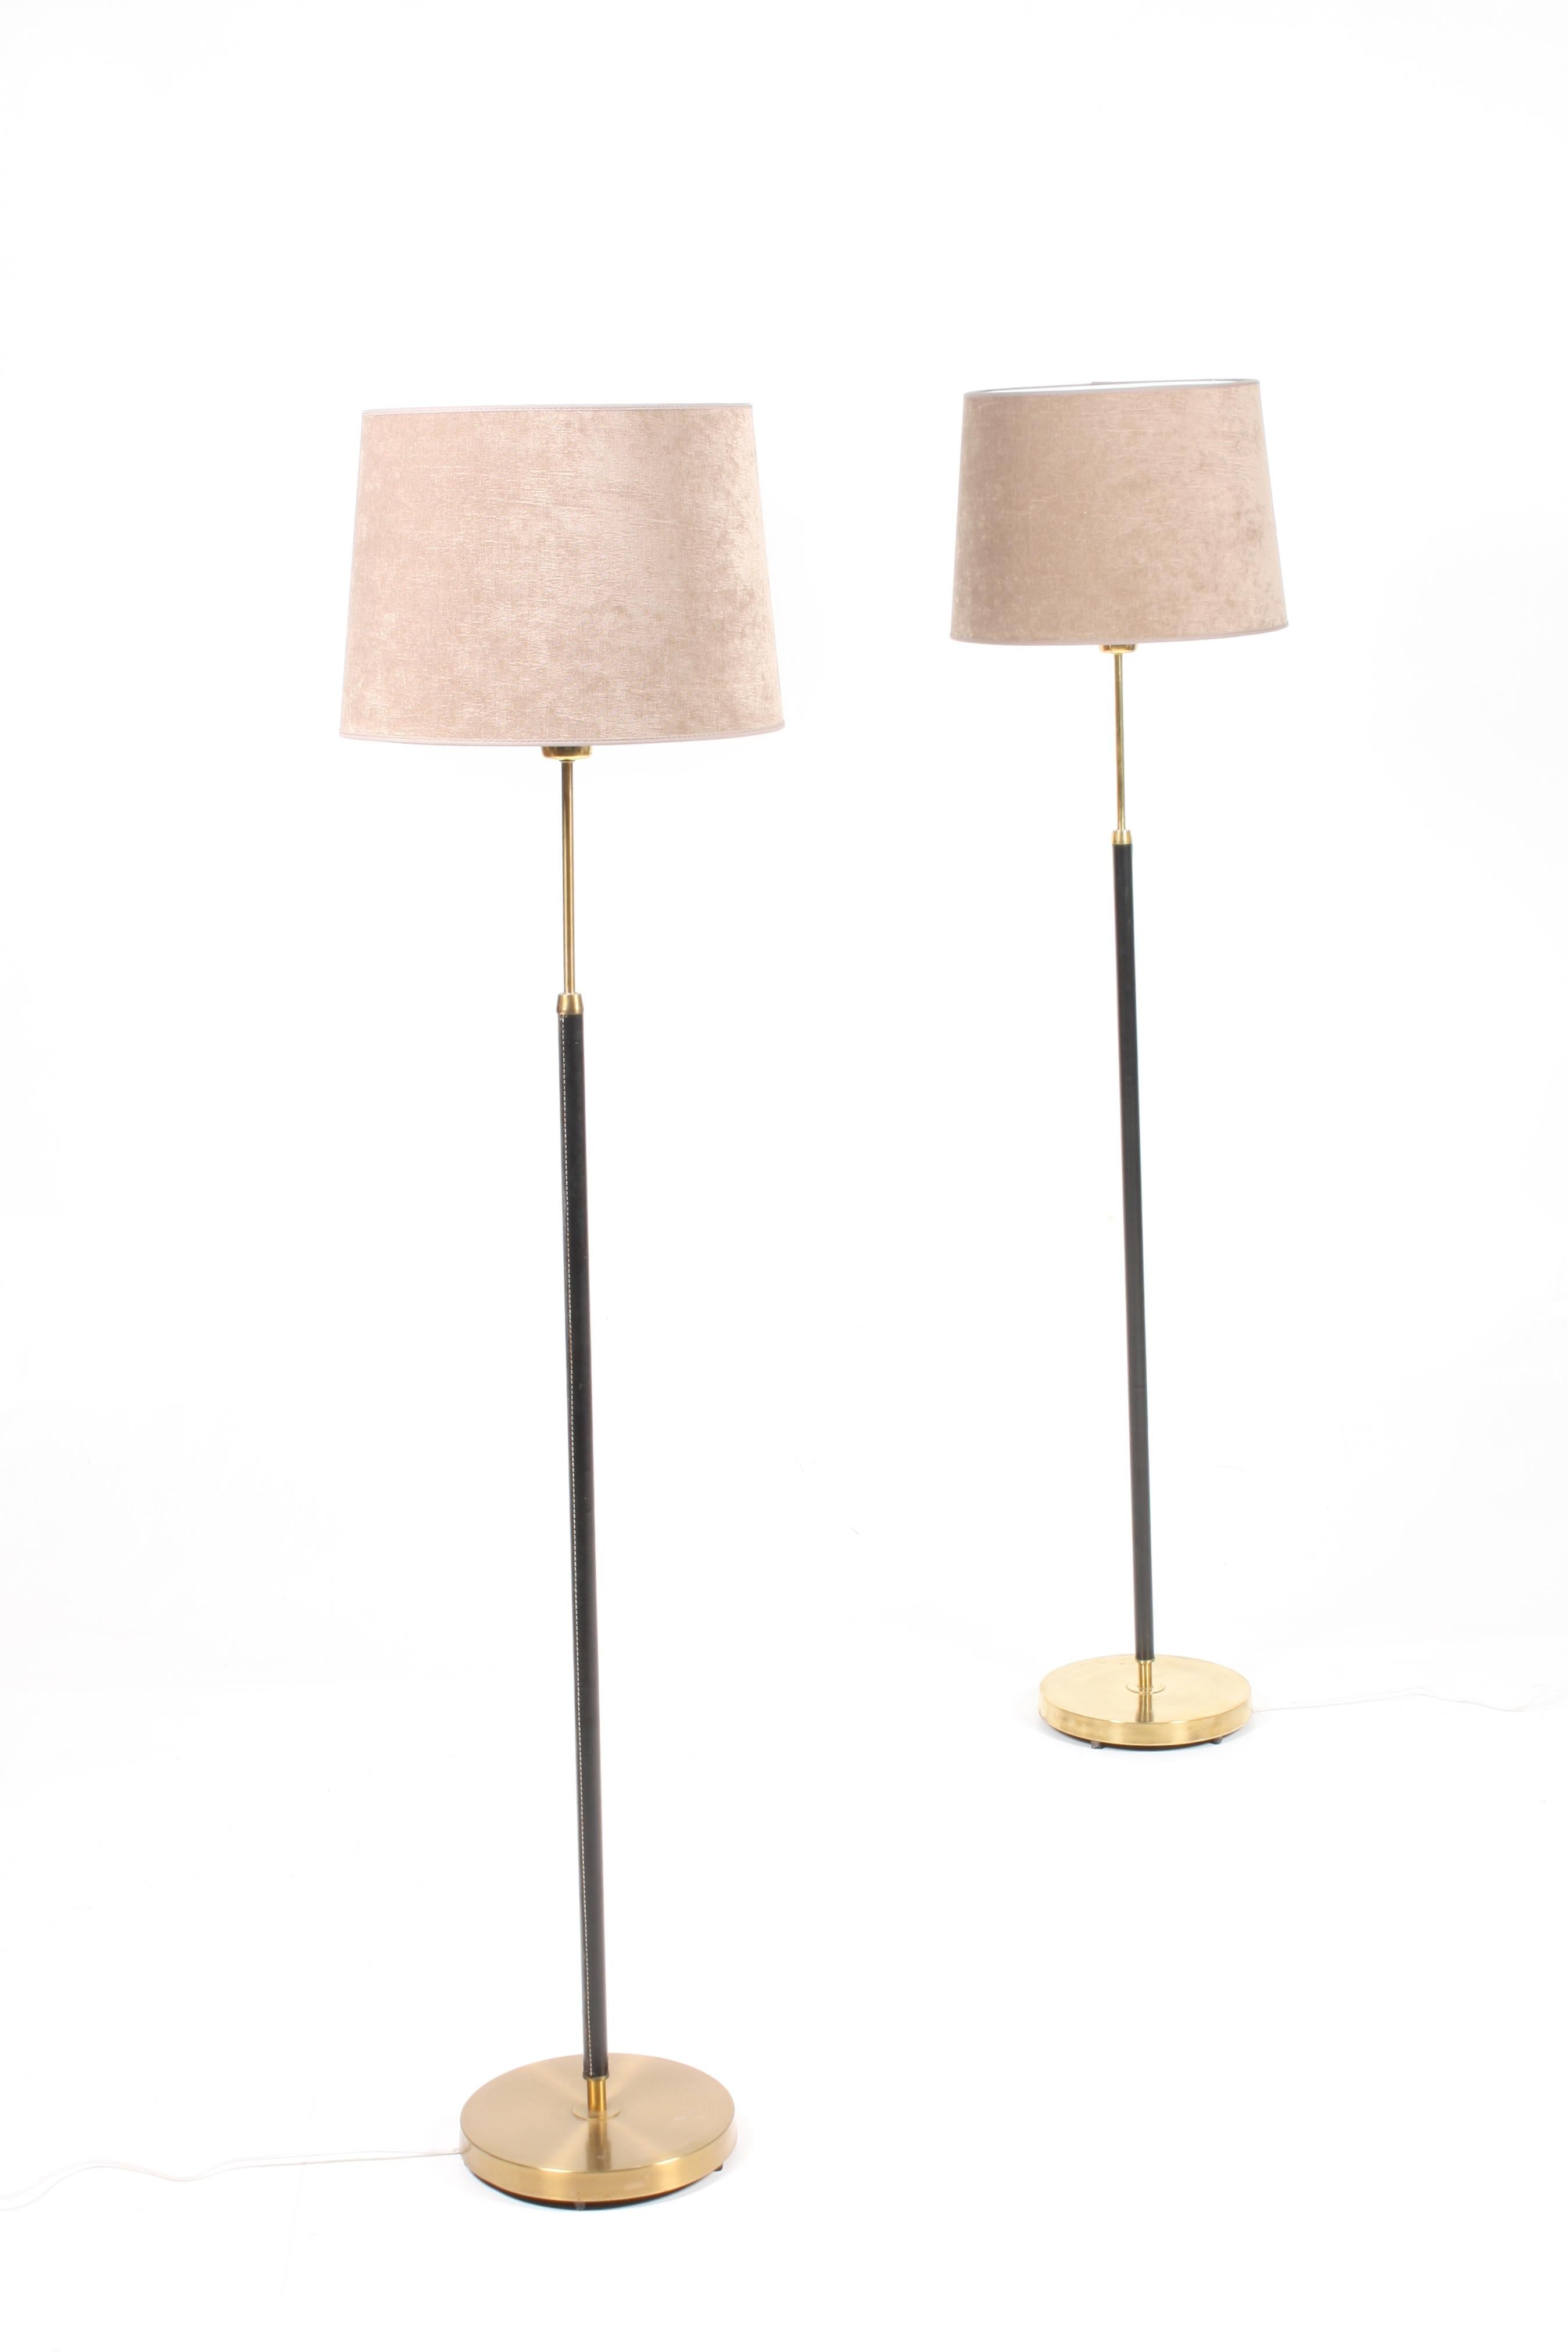 Scandinavian Modern Pair of Midcentury Floor Lamps in Brass and Leather, Swedish Modern, 1950s